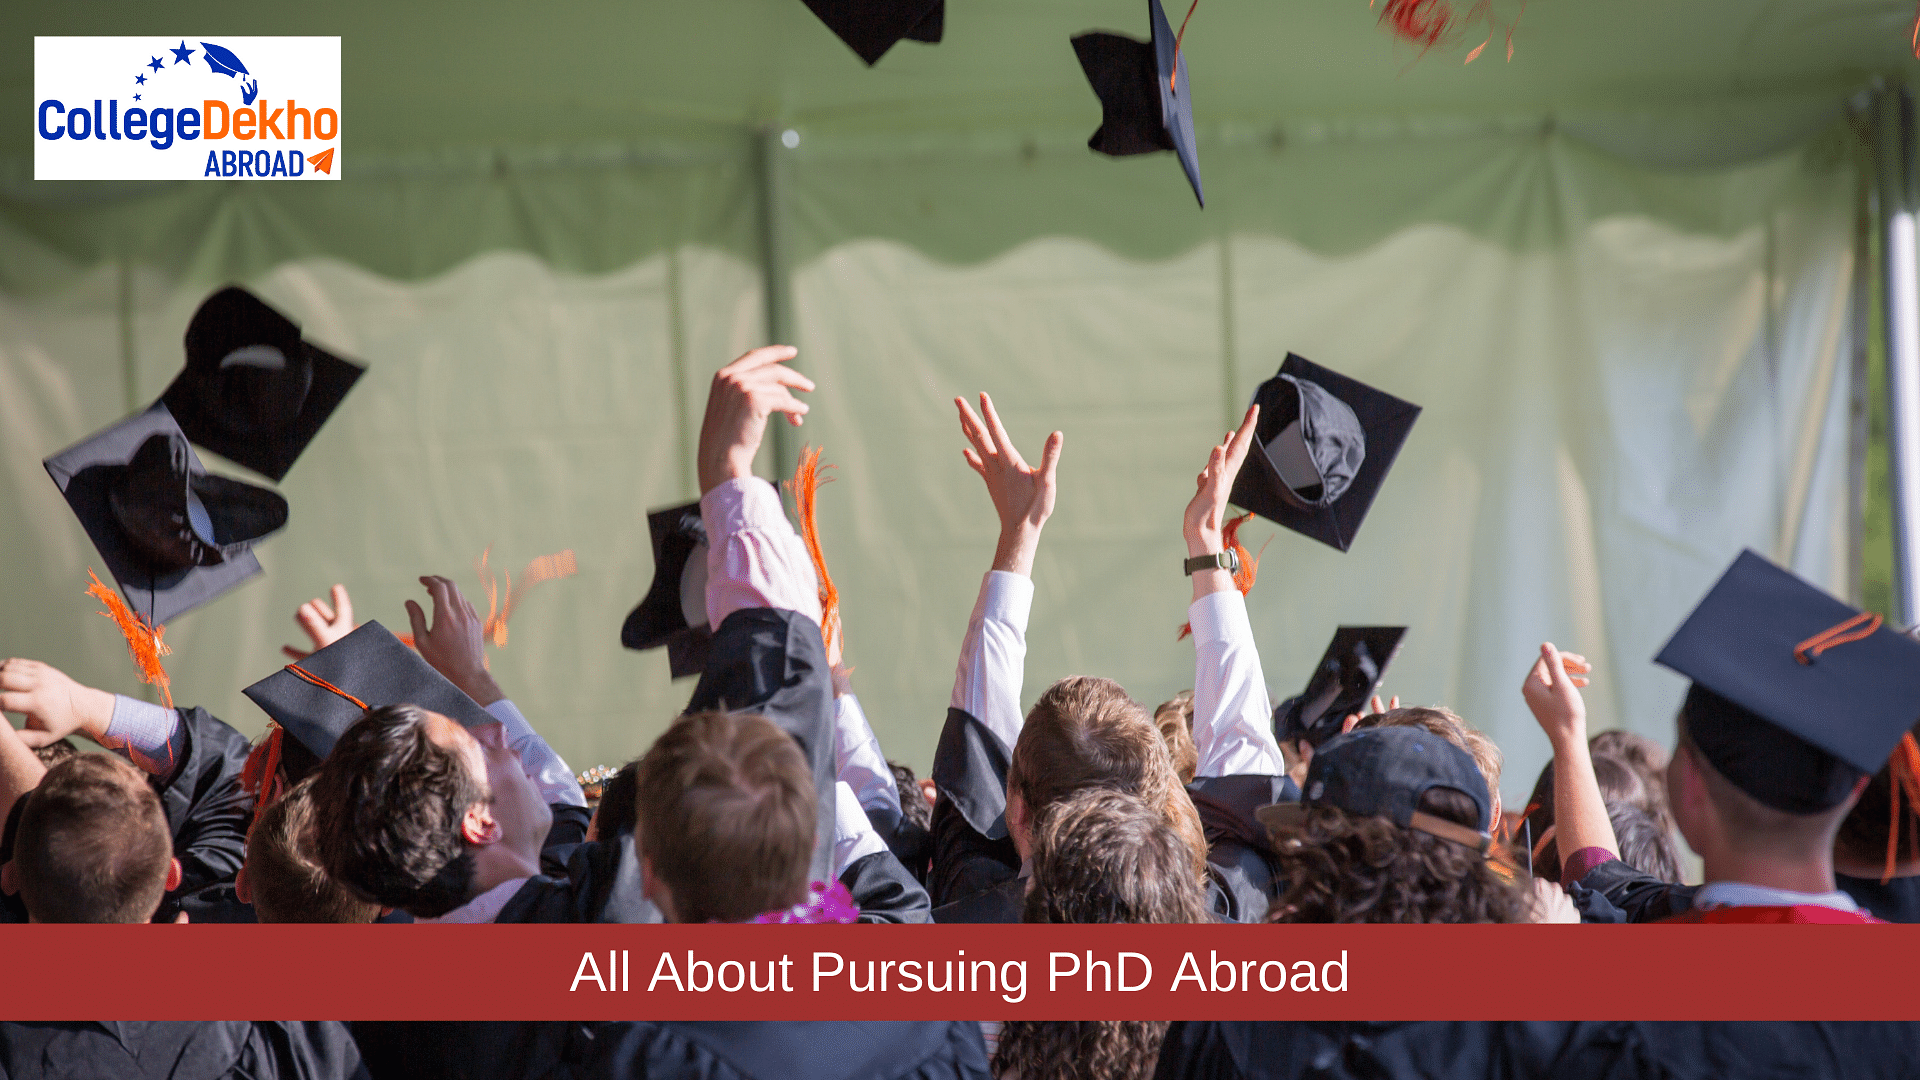 All About Pursuing PhD Abroad